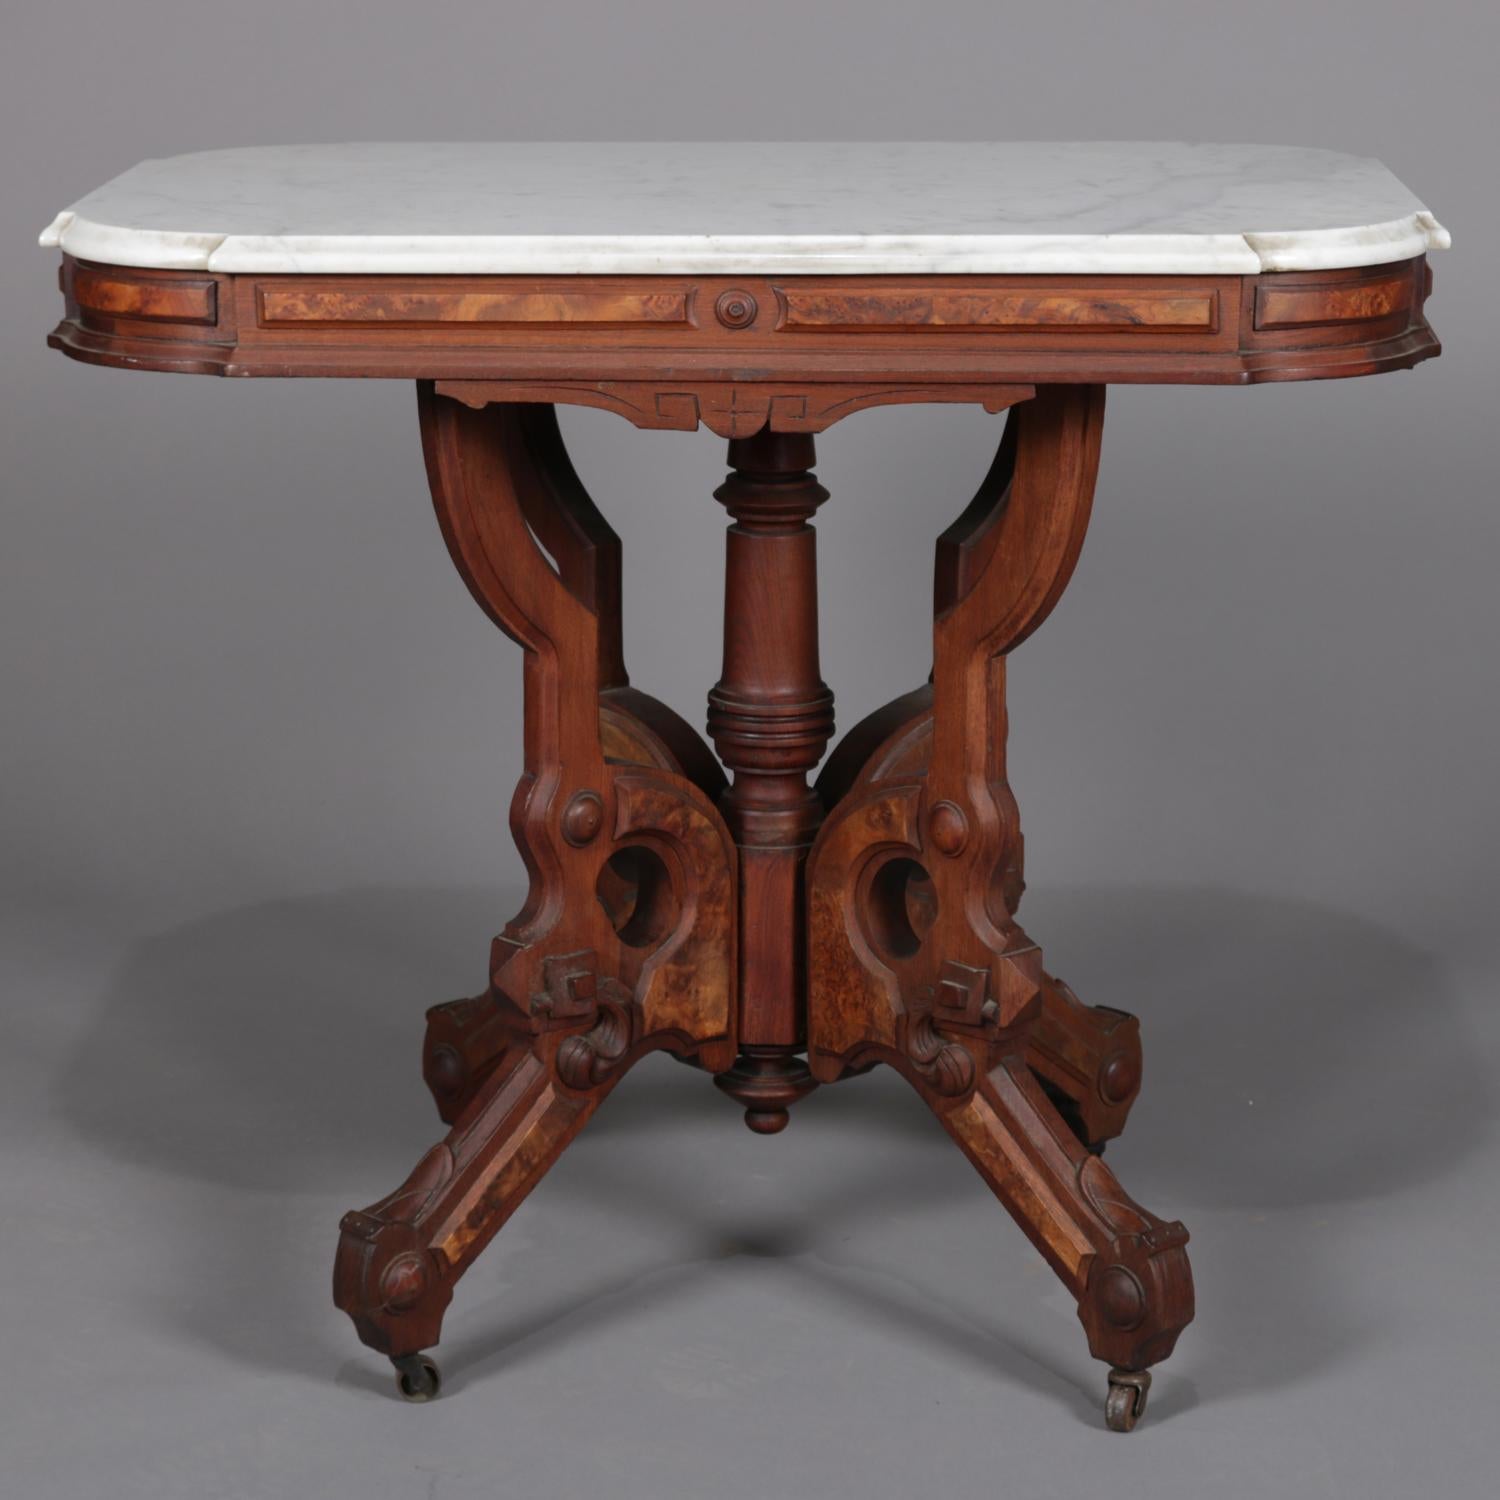 Antique Victorian Eastlake centre table features rectangular clip-corner form with bevelled marble top surmounting carved walnut base having carved apron with burl inset over central turned pedestal and surround of four legs with burl and on